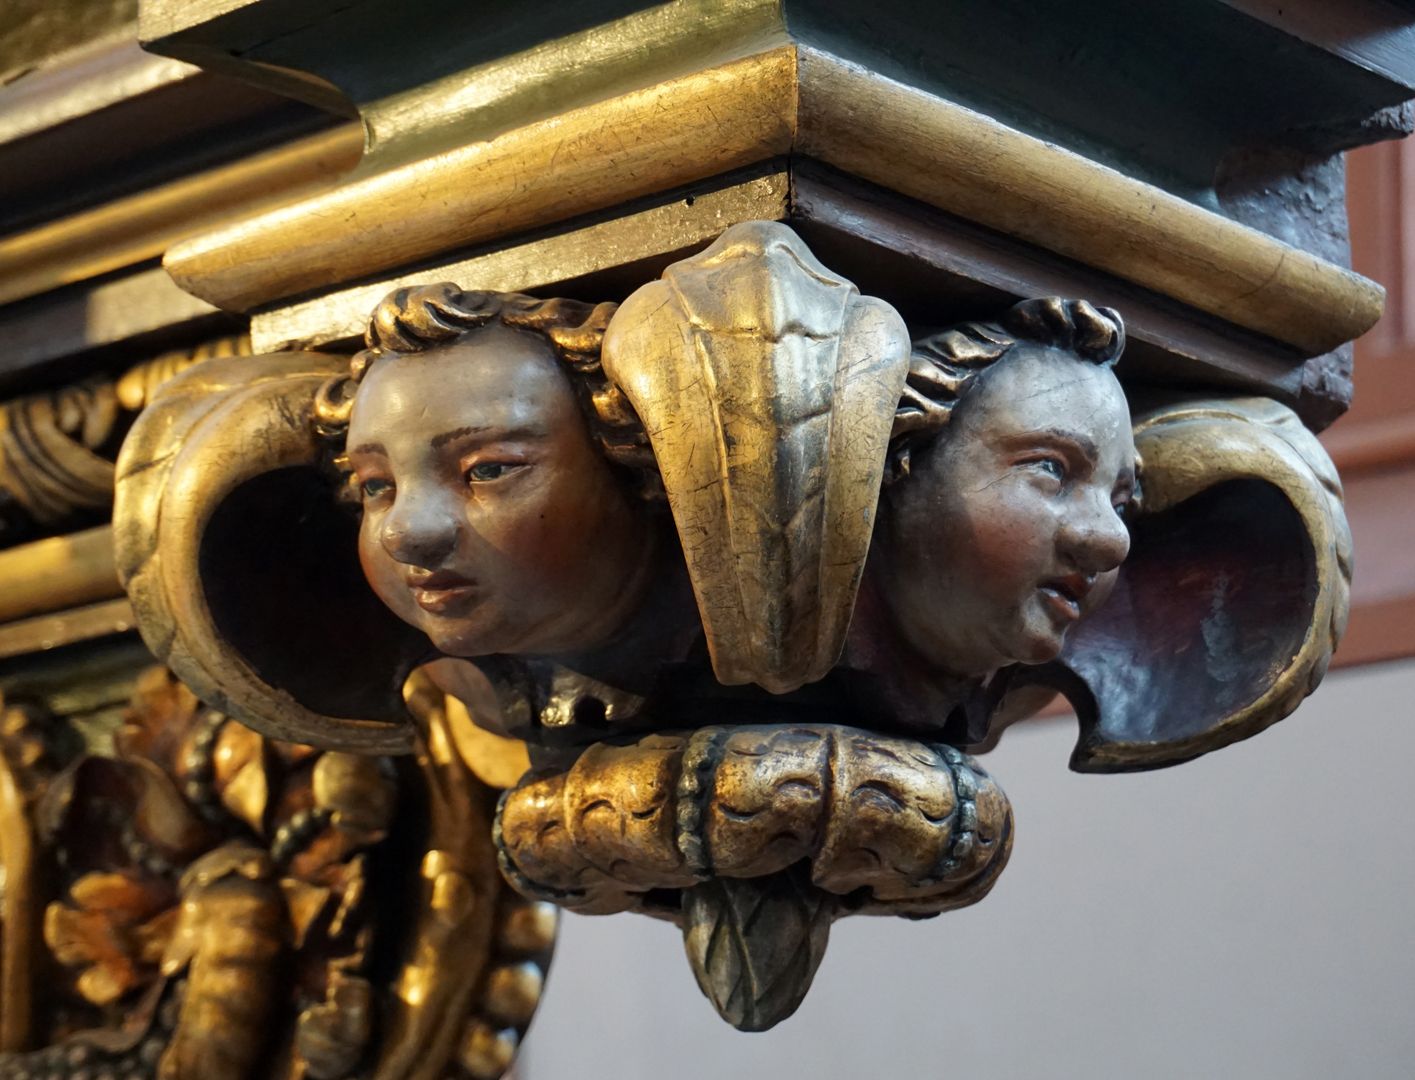 High Altar Hanging head capital below the right altarpiece